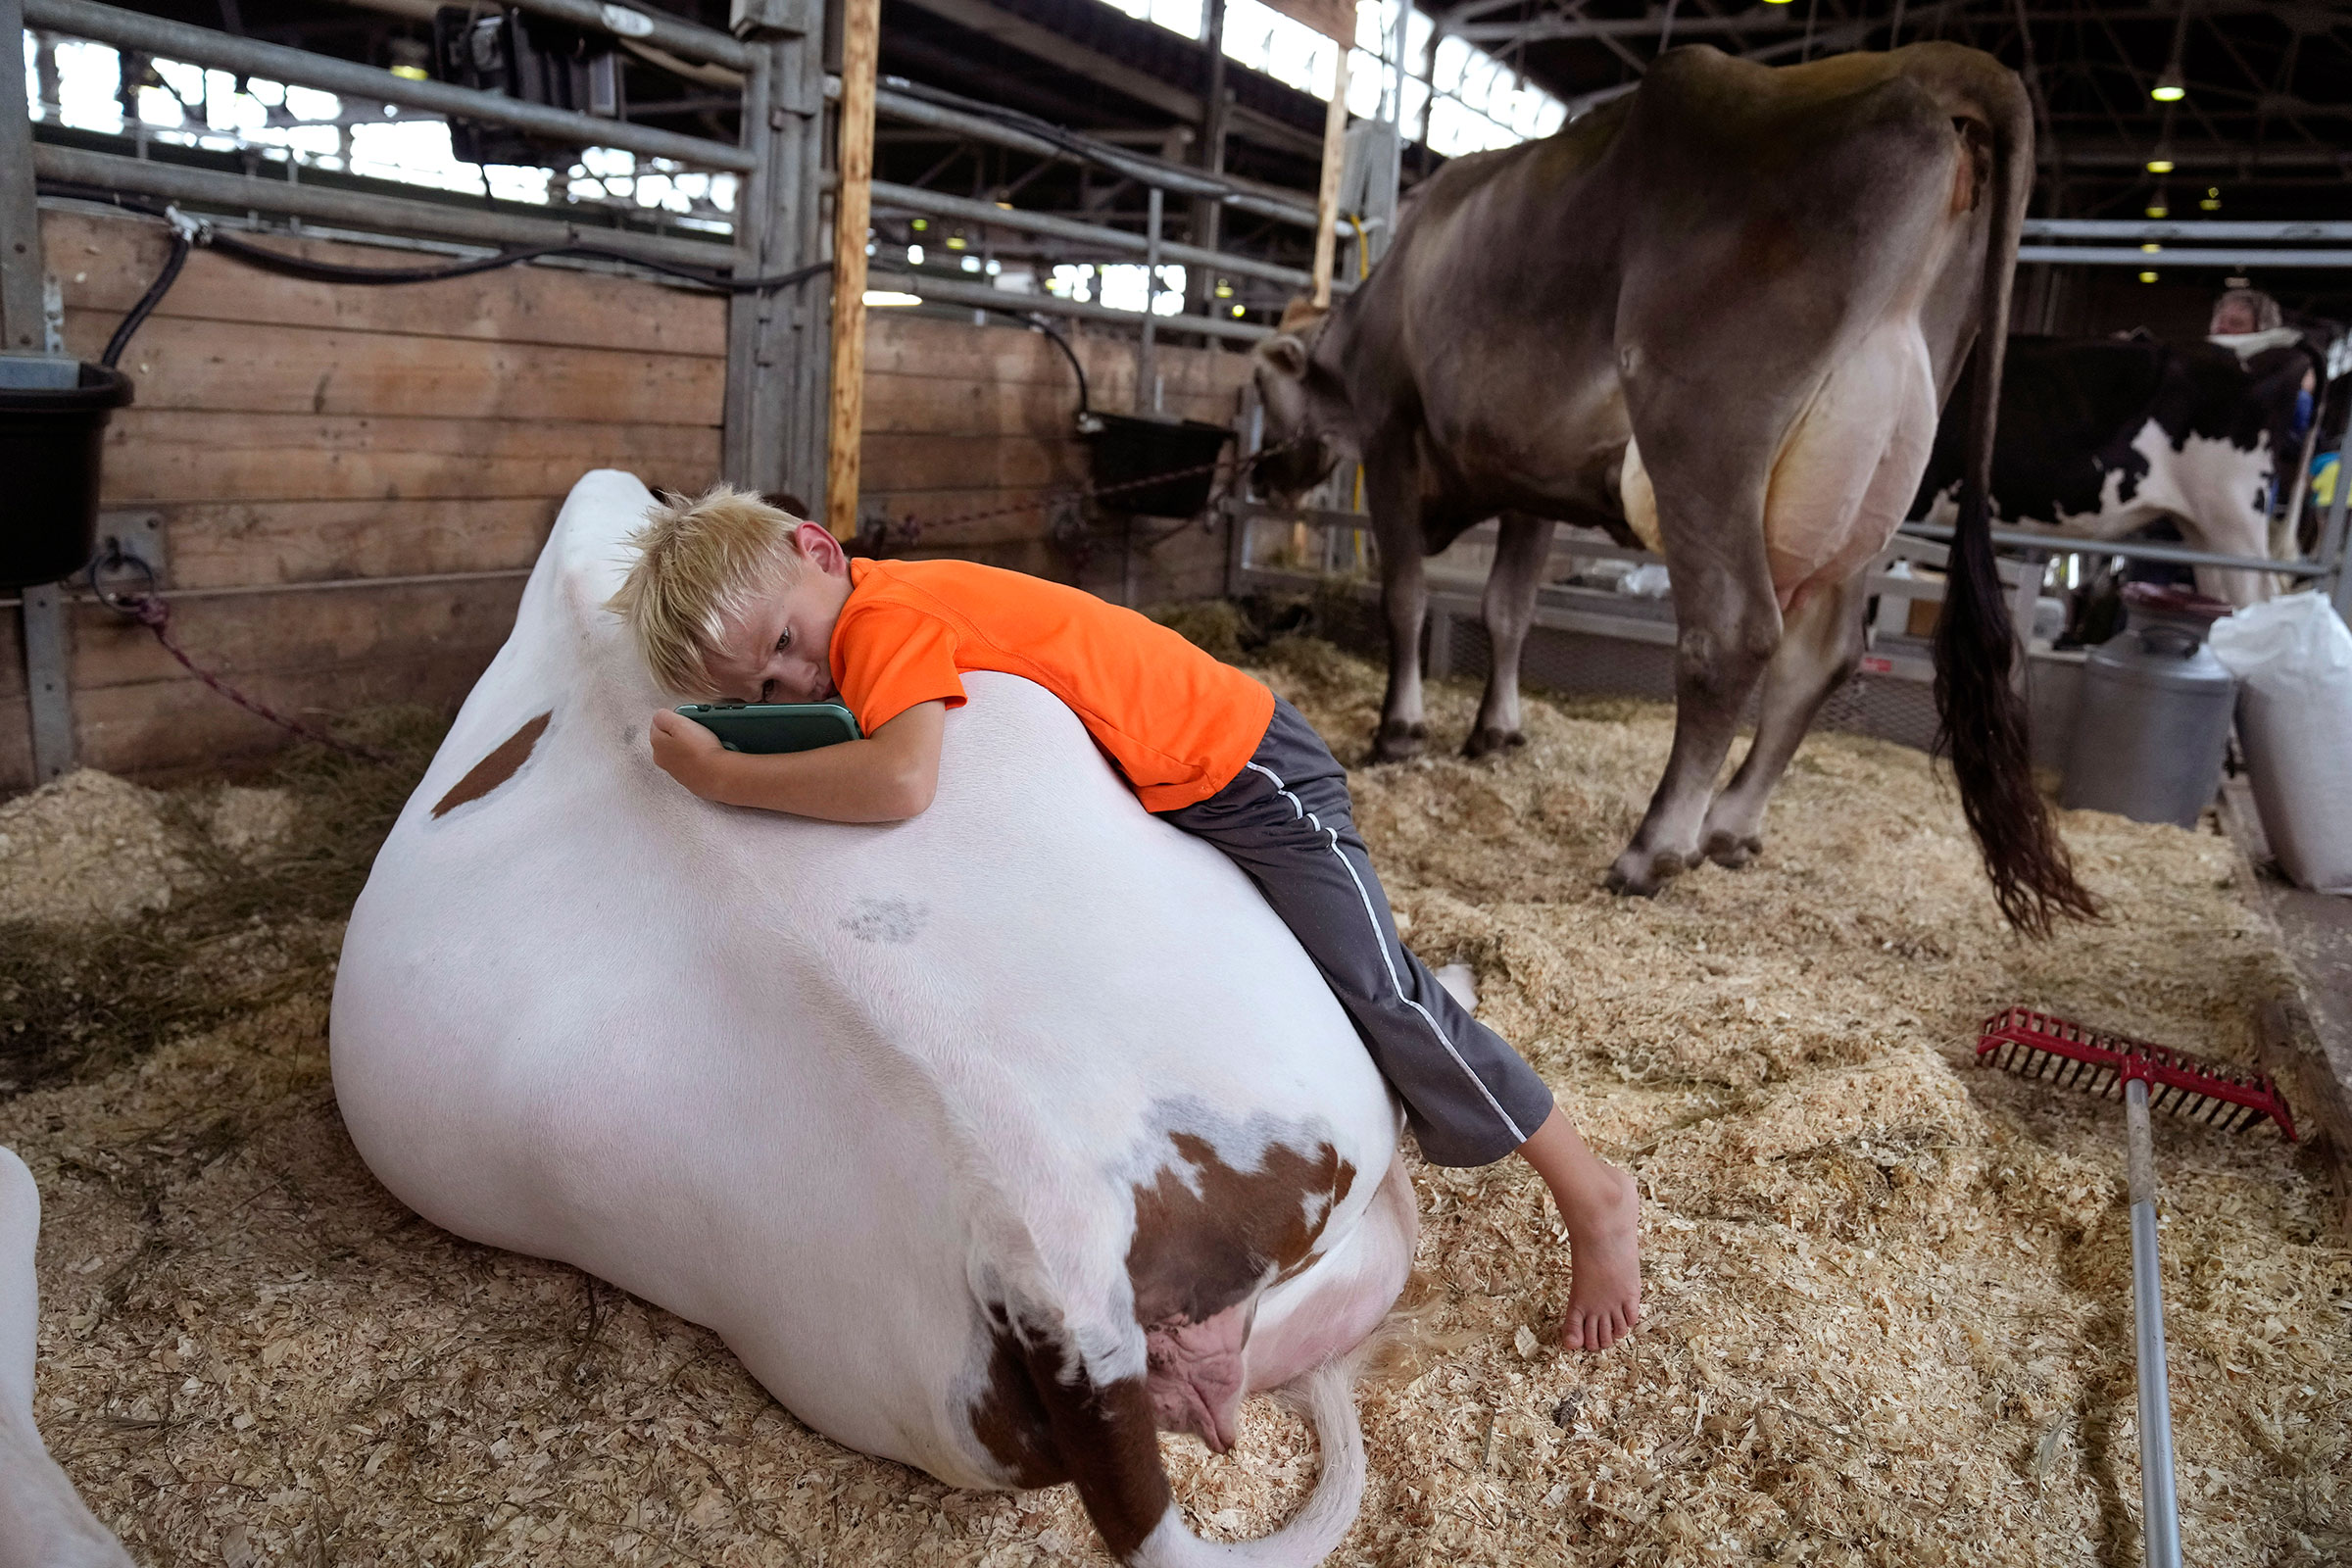 Five-year-old Jack Sawyer, of Dillon, Iowa, lays on the back of a cow in the cattle barn